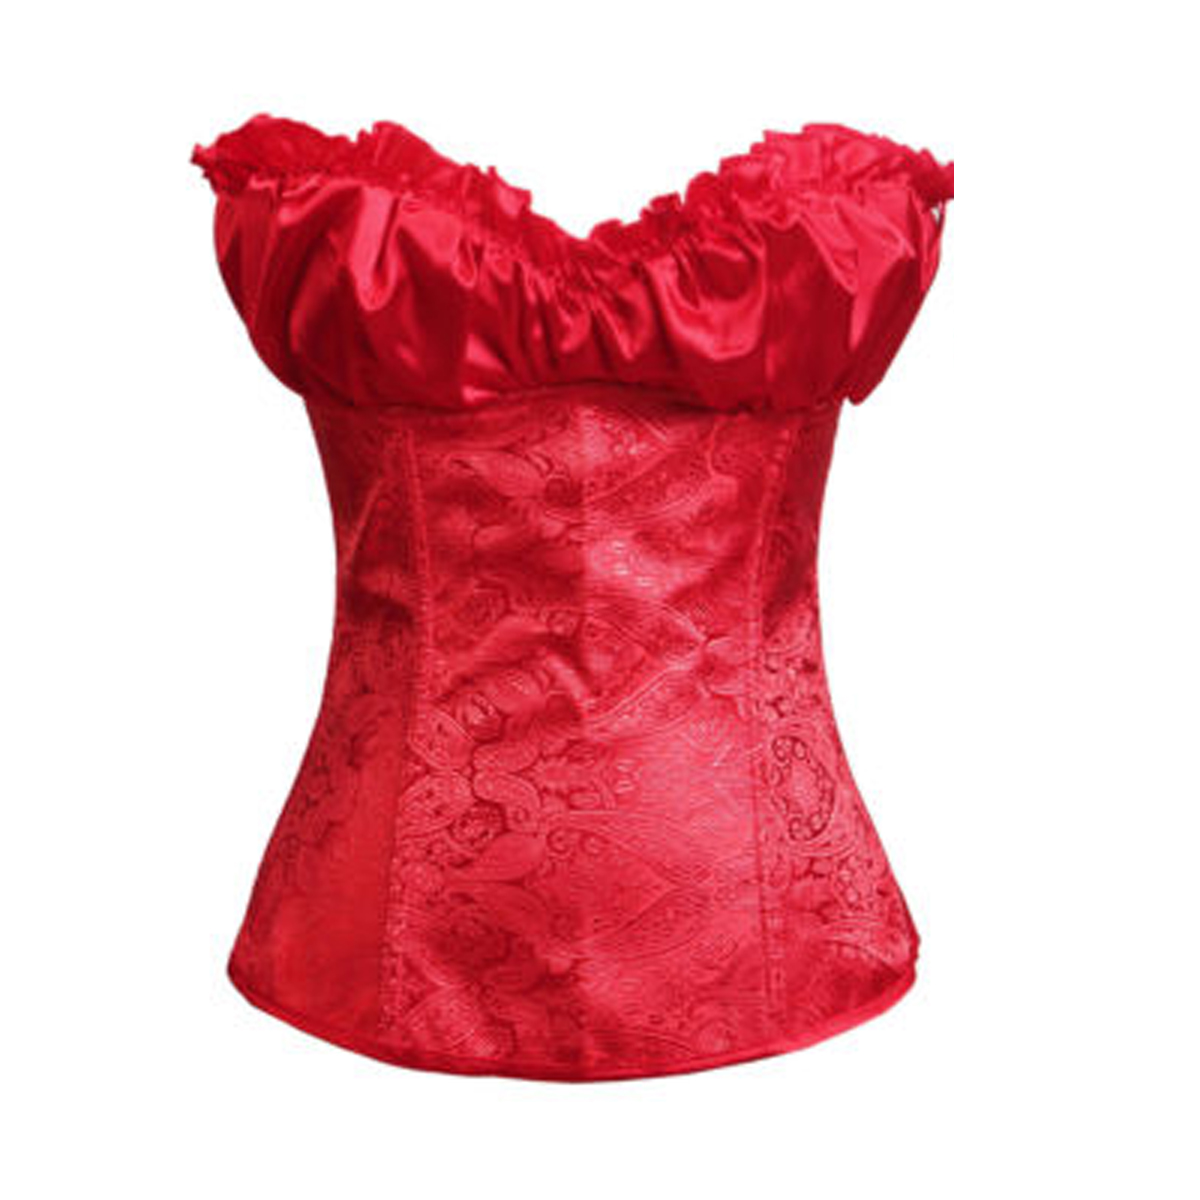 Red-Corset and Bustier for Women Burlesque Wedding Renaissance Satin Padded Corsetto Plus Size Zip Medieval Carnival Party Clubwear